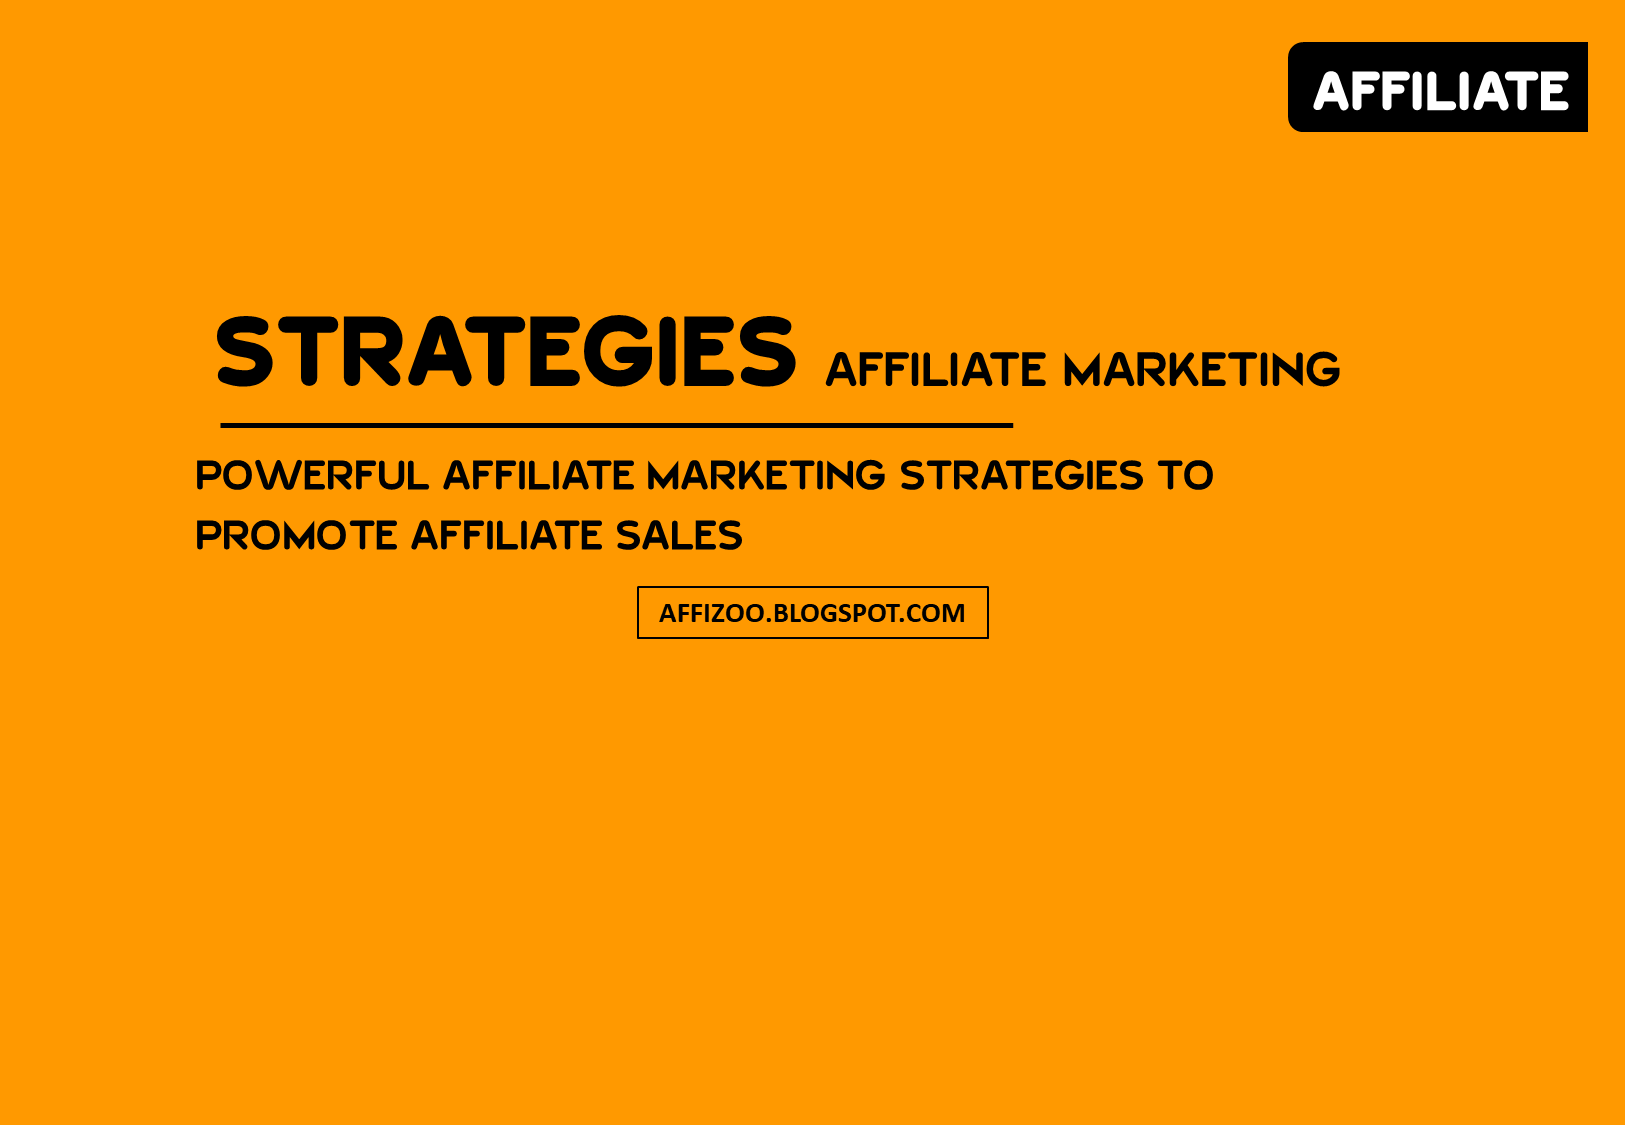 Top 7 Affiliate Marketing Strategies To Promote For More Sales